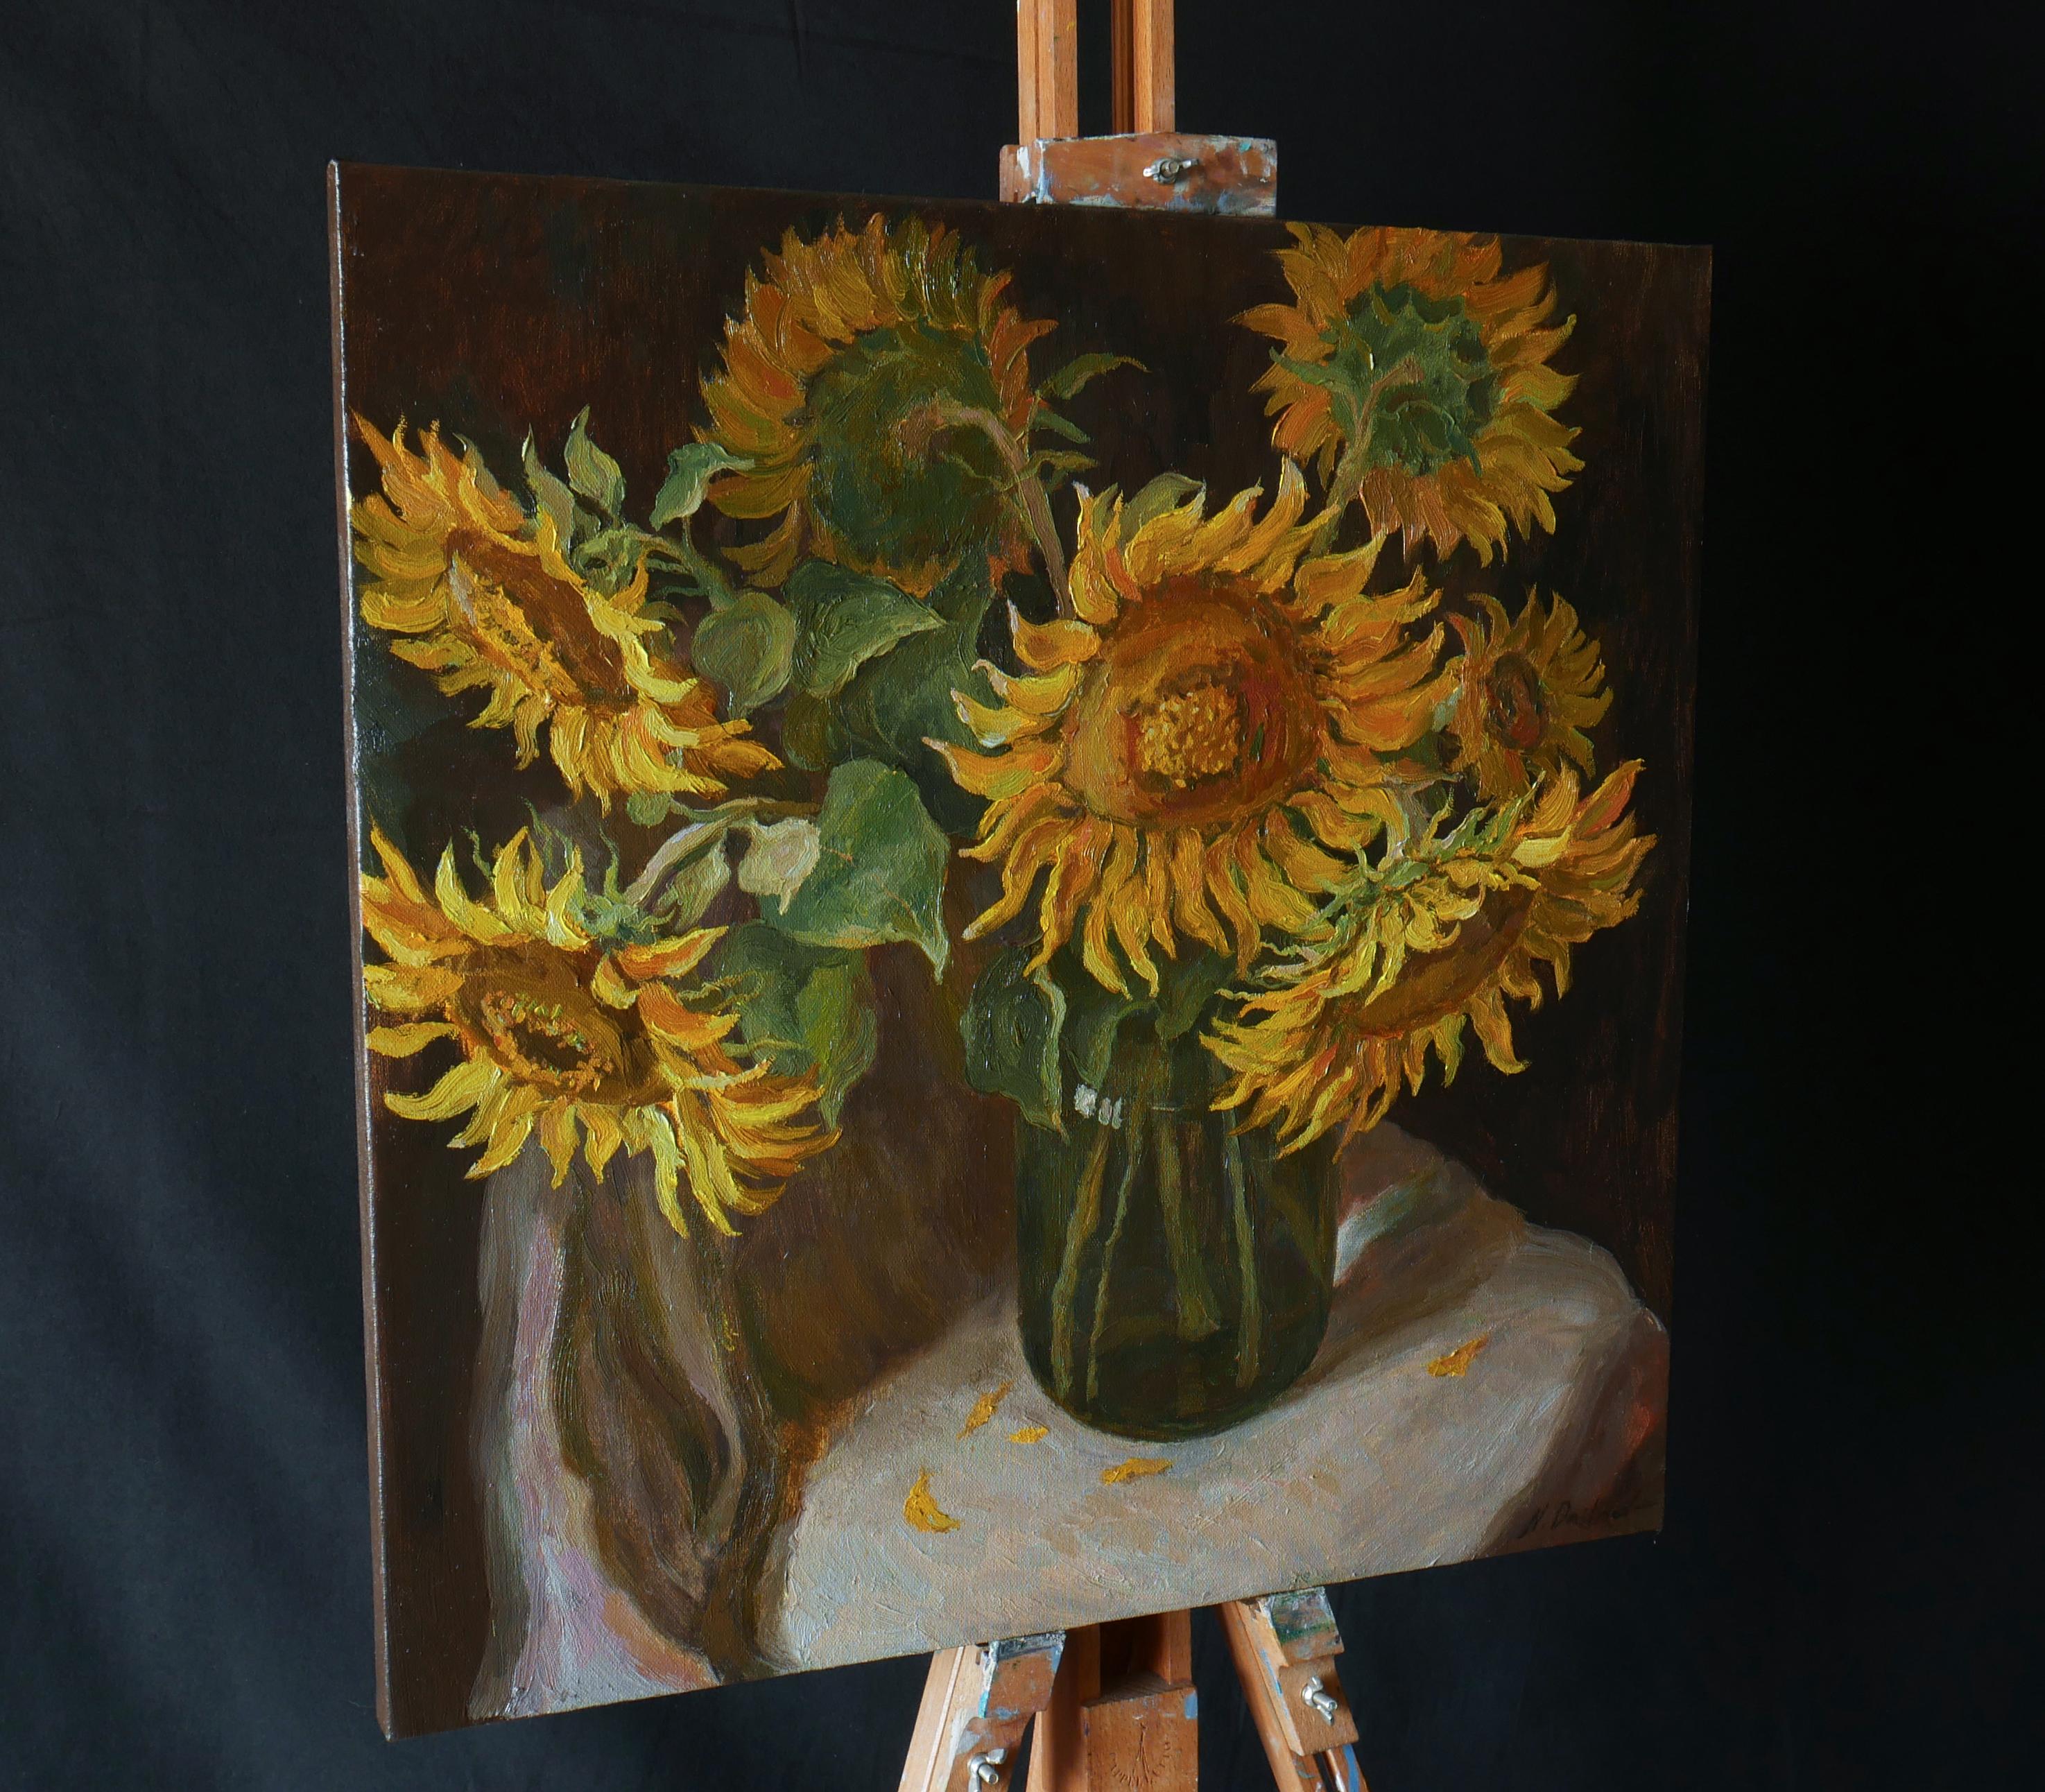 The Bouquet Of Sunflowers - sunflower still life painting - Painting by Nikolay Dmitriev